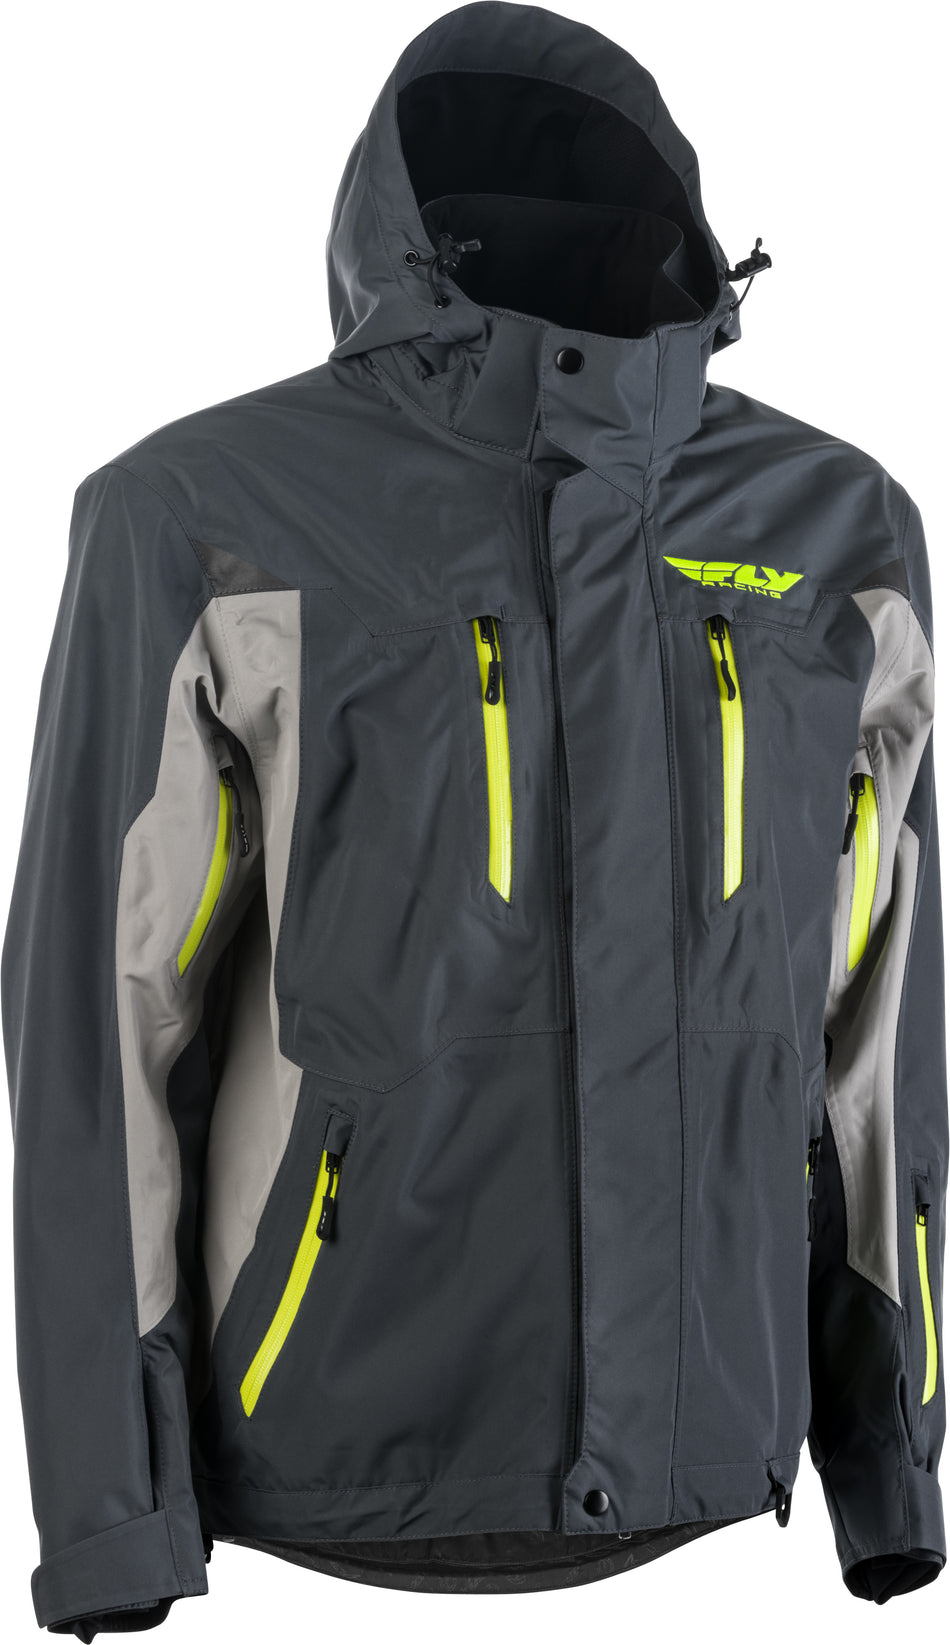 FLY RACING Fly Incline Jacket Grey/Charcoal Lg 470-4101L